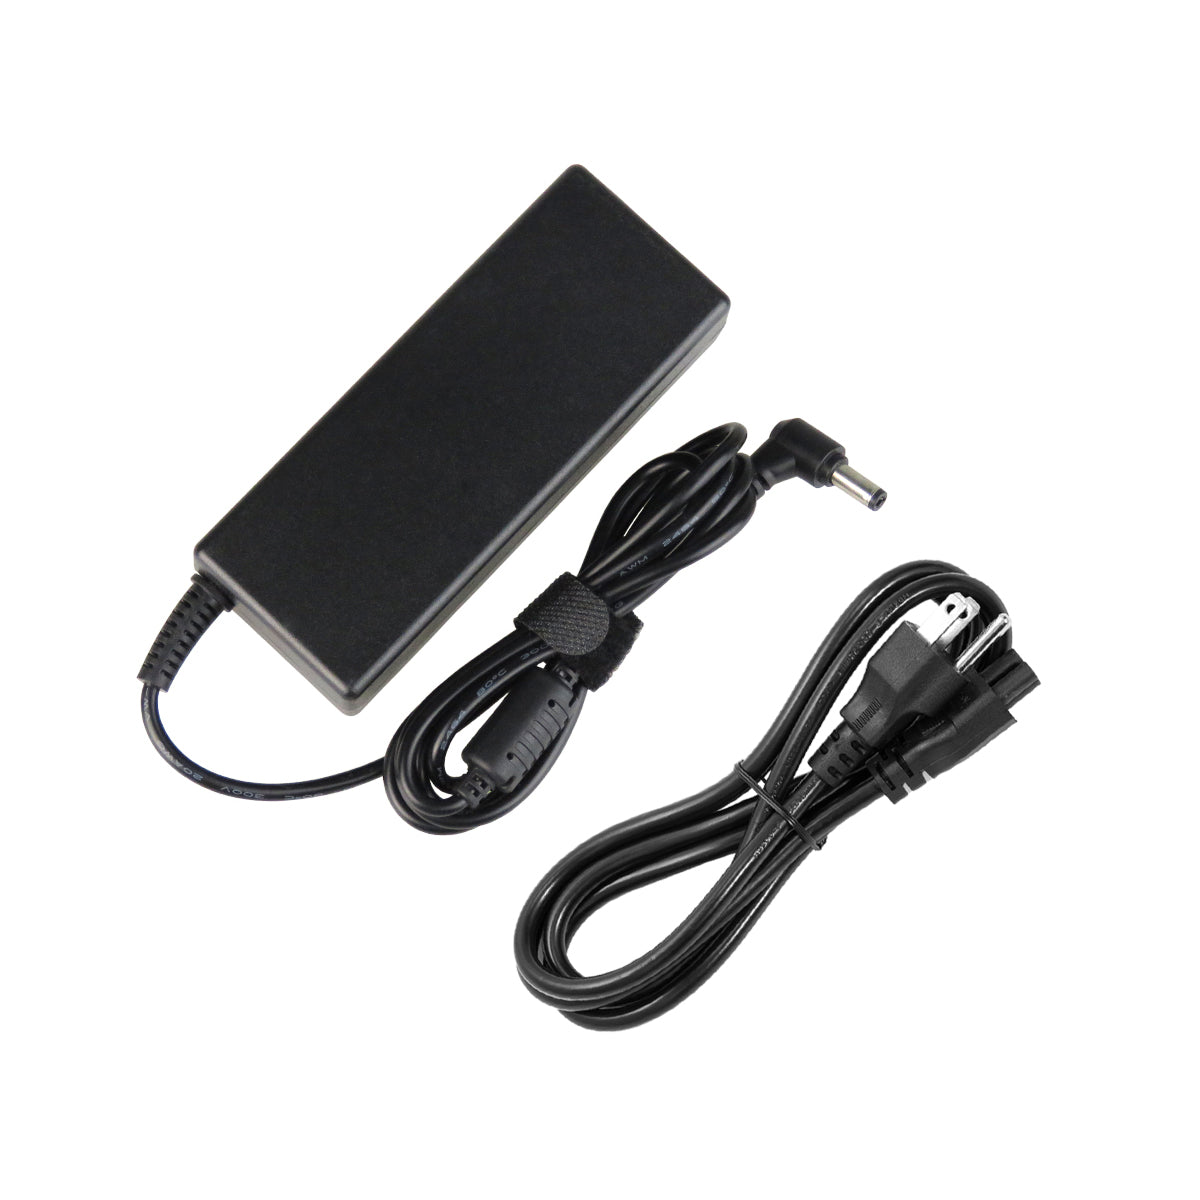 AC Adapter Charger for ASUS A55VM Notebook.